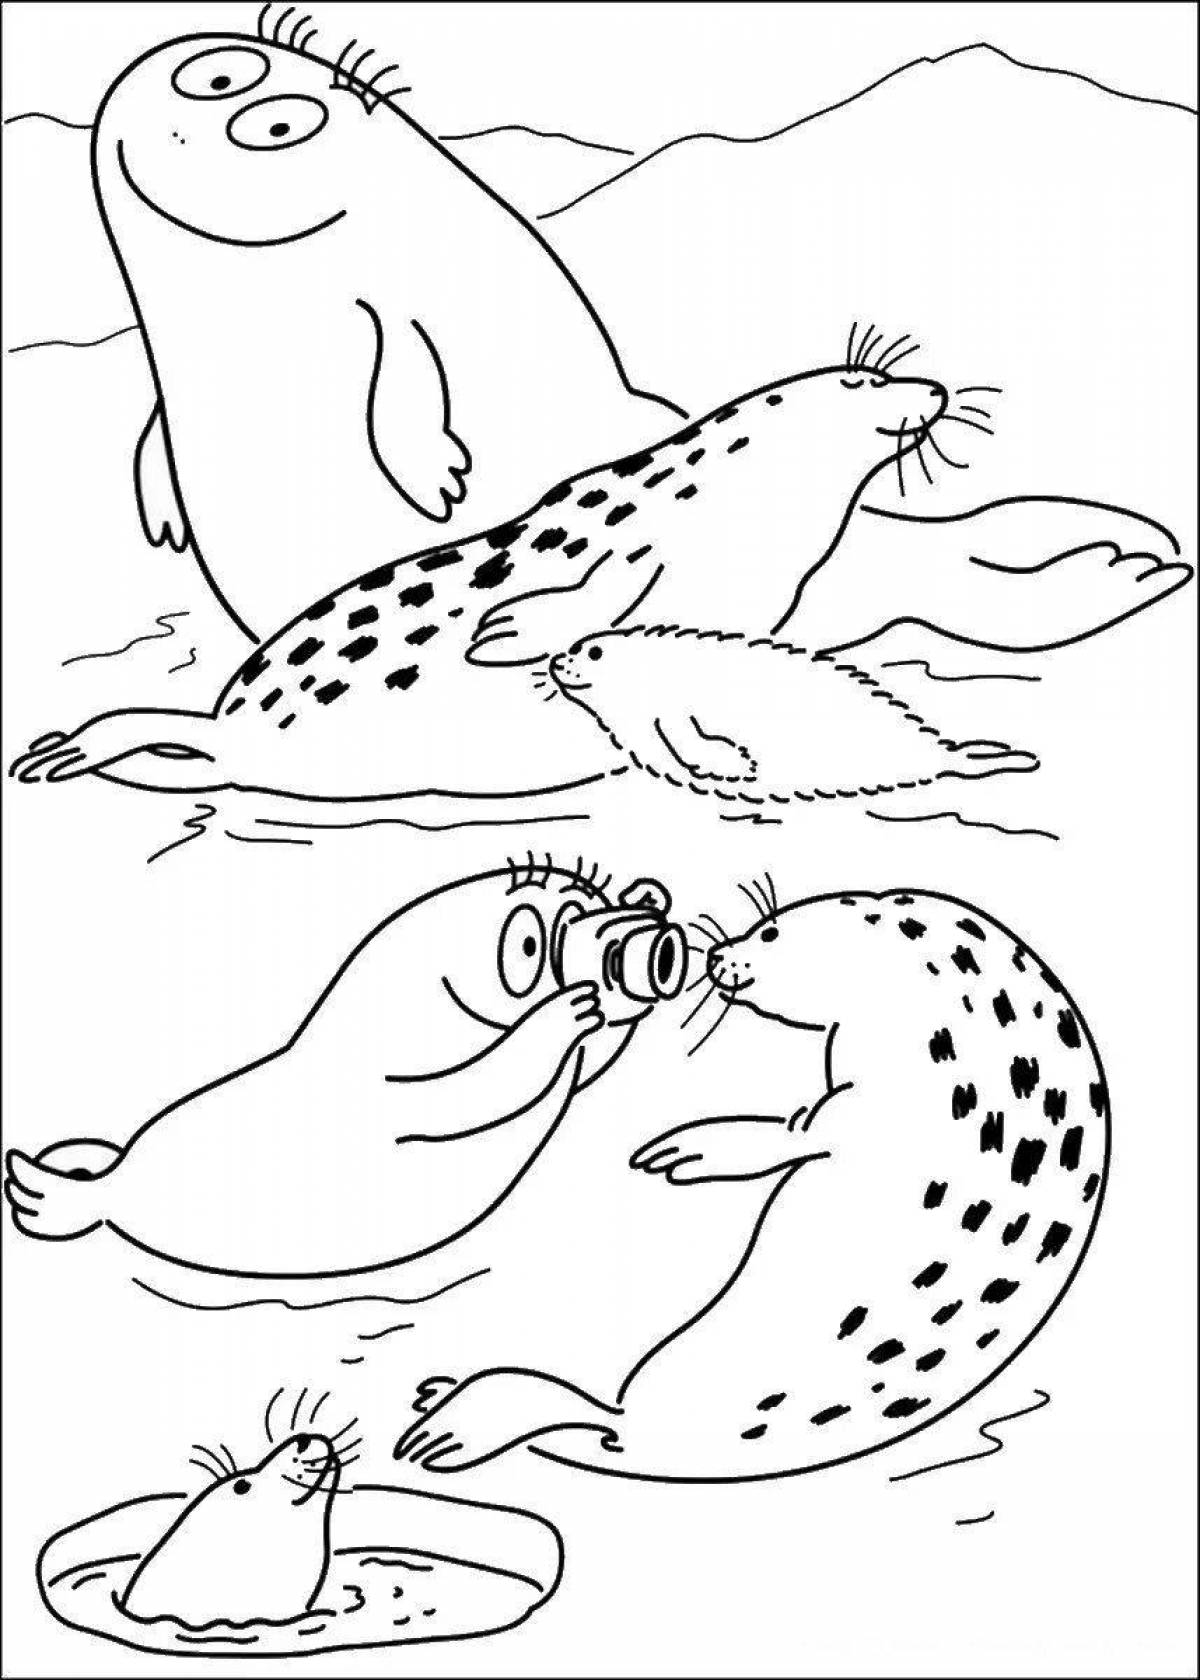 Adorable sea lion coloring book for kids